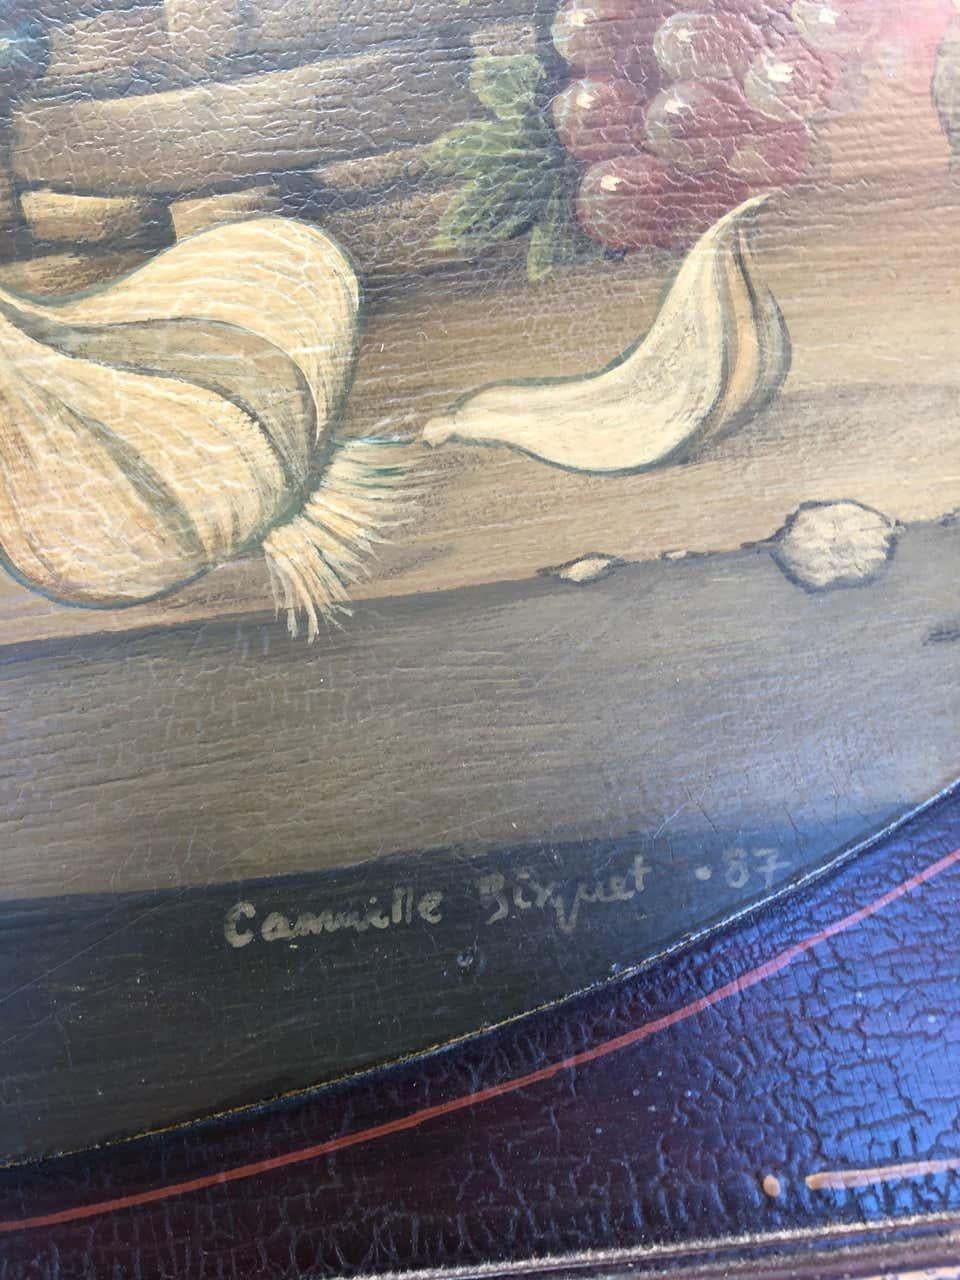 Unique pair of 19th century oil paintings on boards. Signed Camille-Marie-Marcel Bouquet and dated 1887. Good color and age craquelure. Each having a plaque at top with the title 